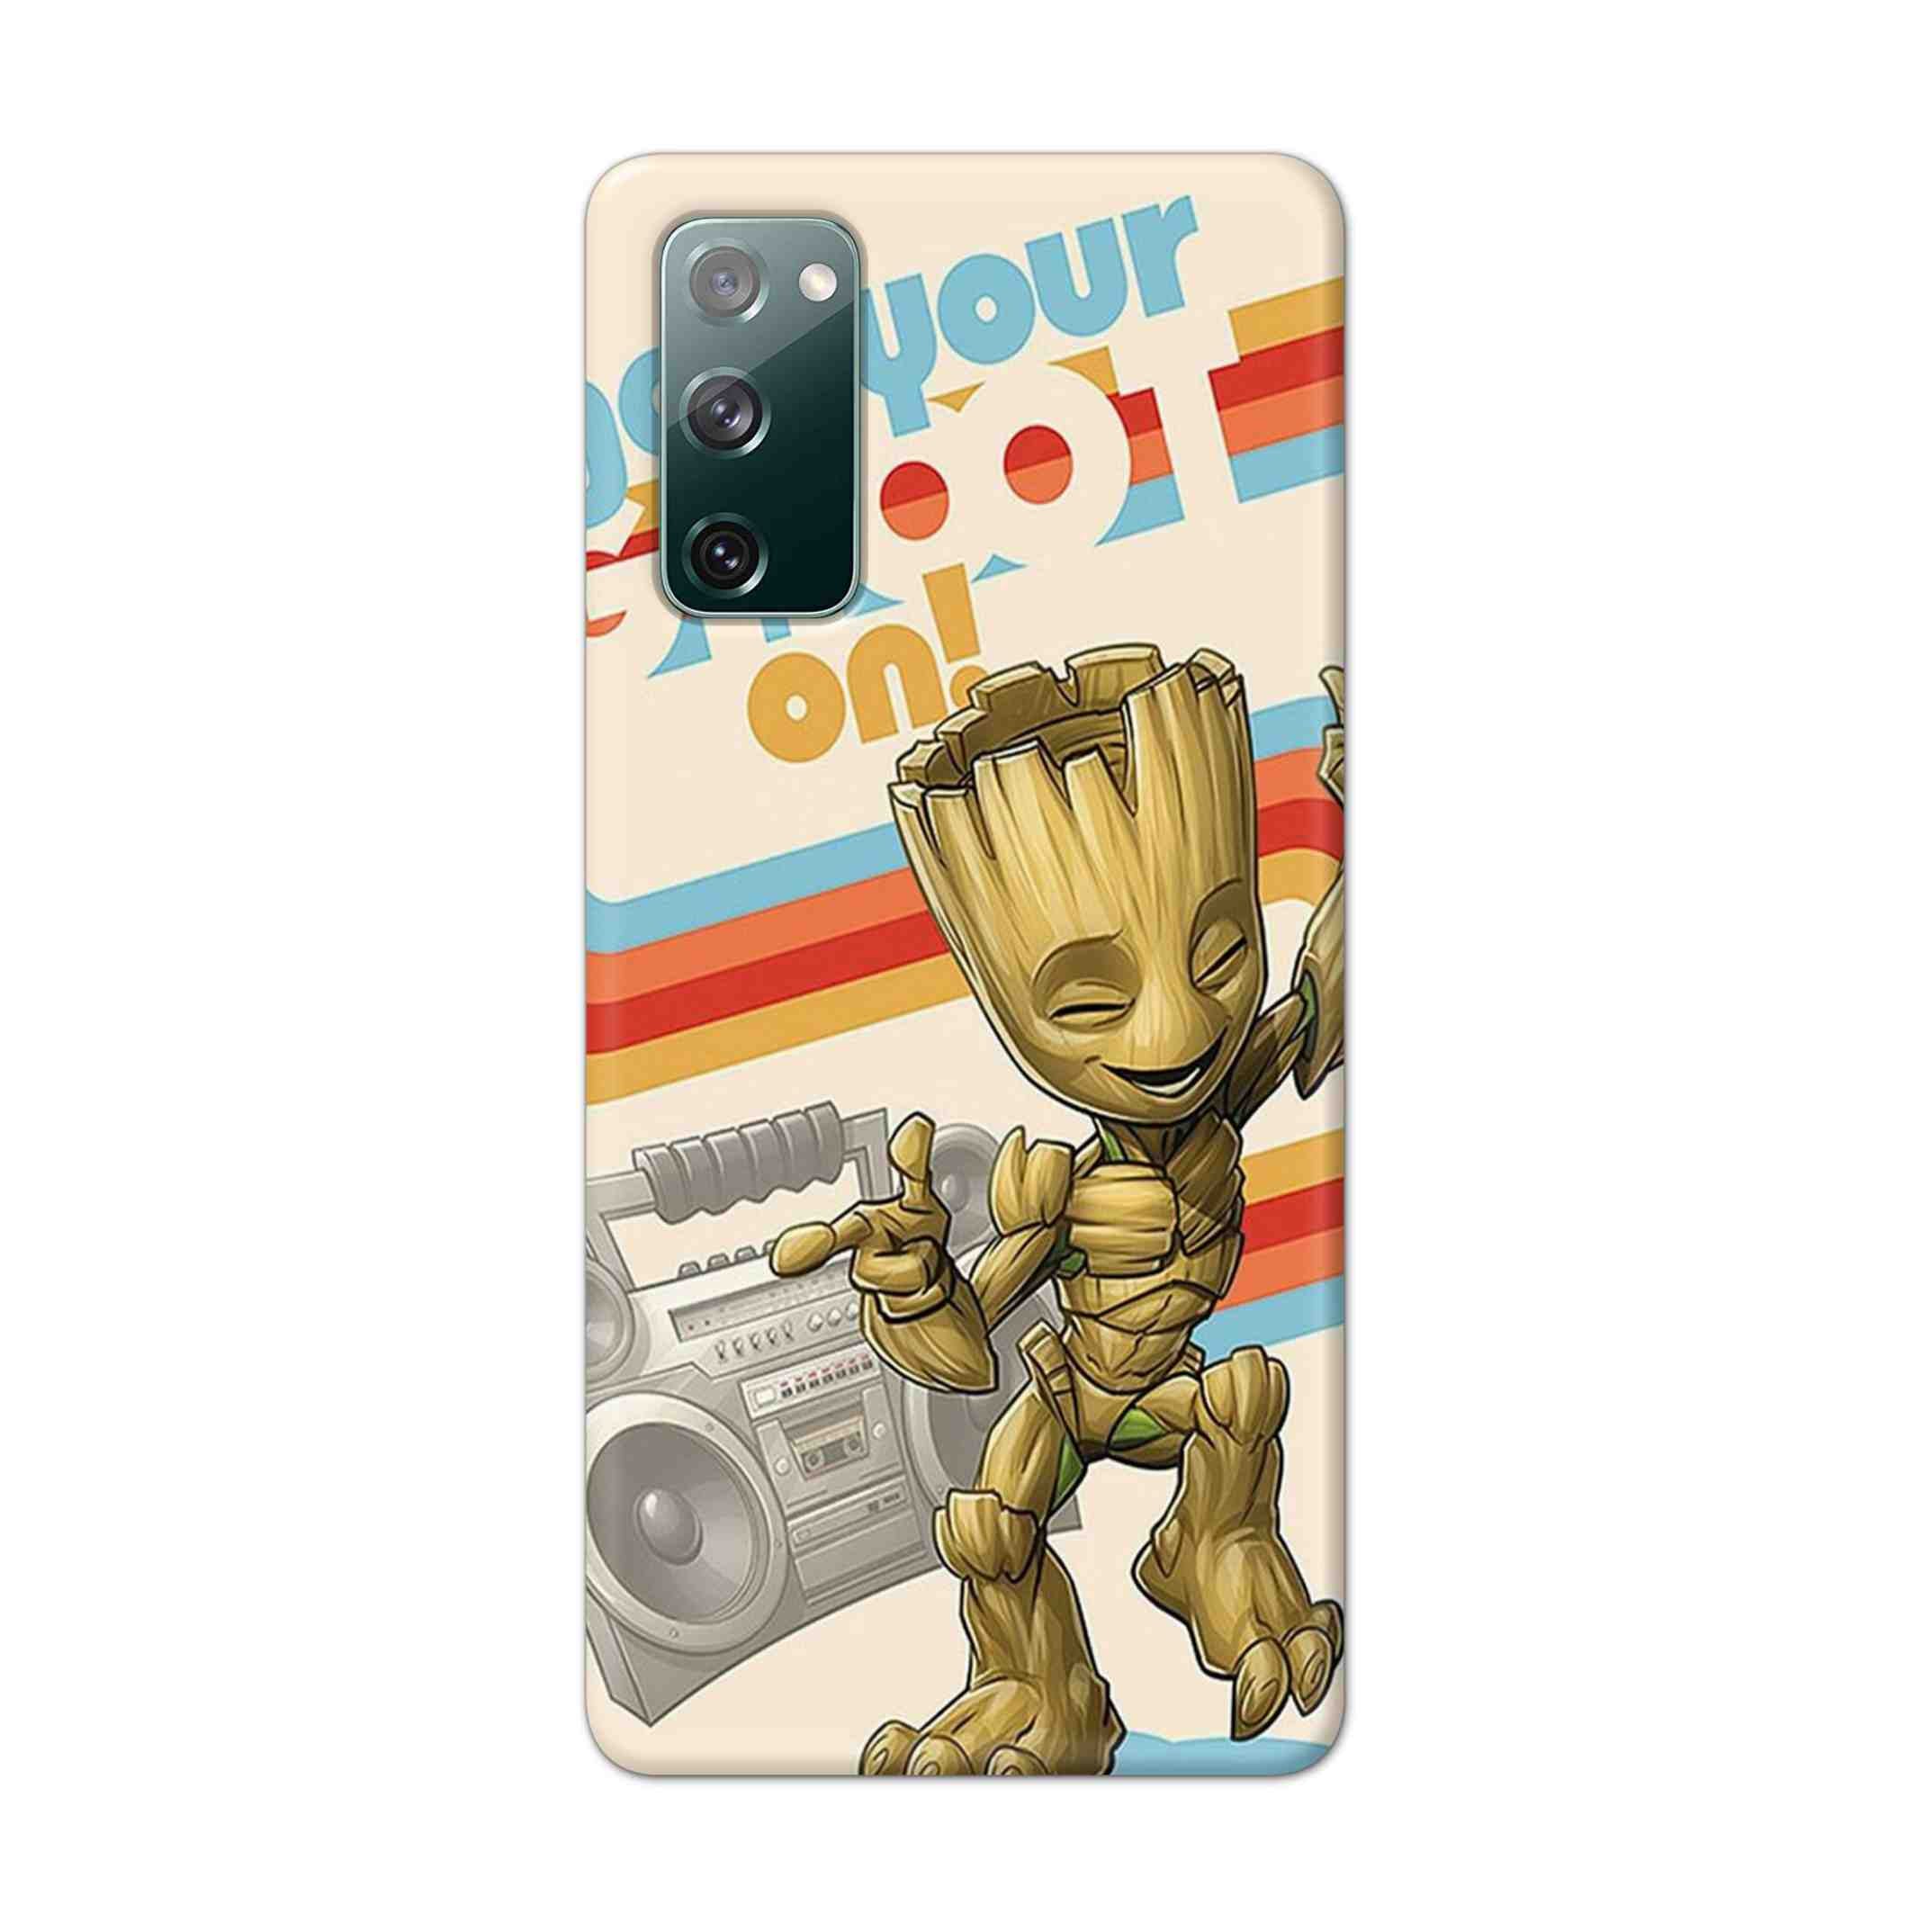 Buy Groot Hard Back Mobile Phone Case Cover For Samsung Galaxy S20 FE Online